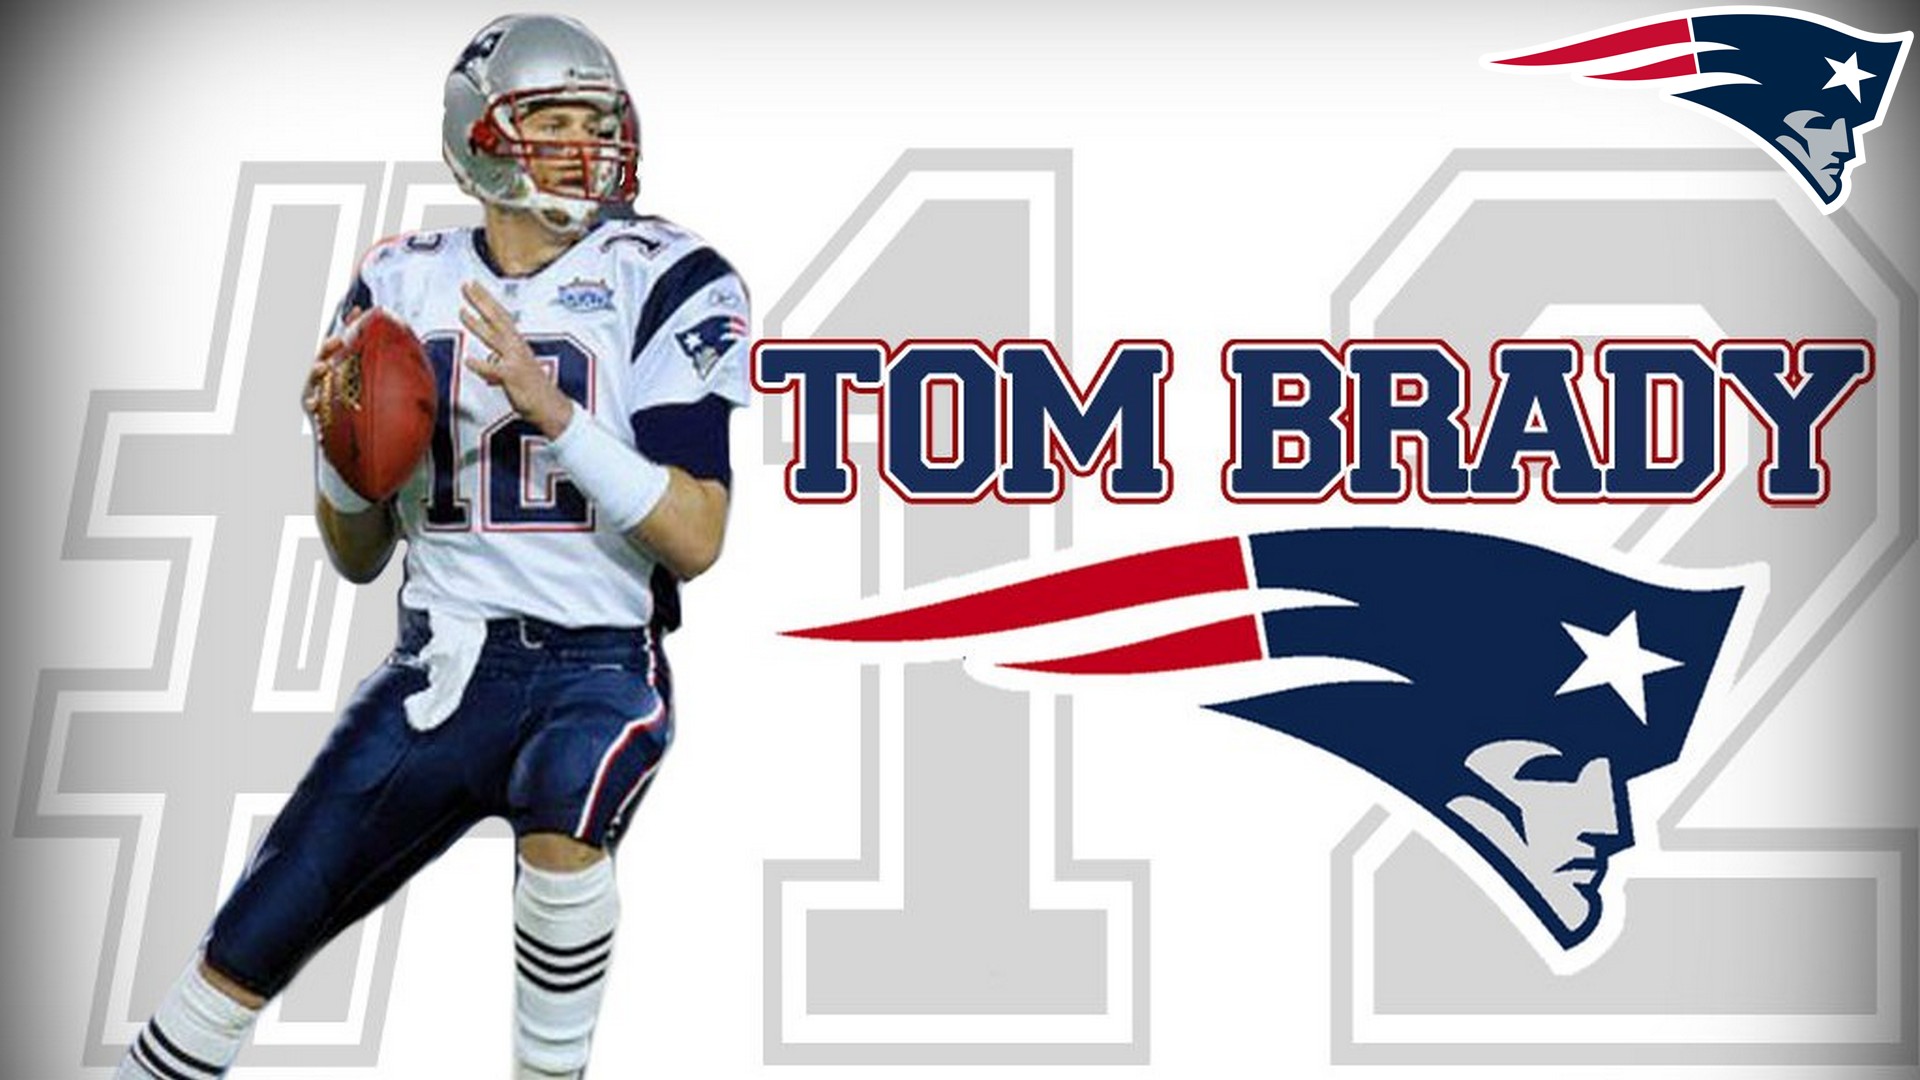 Tom Brady Goat Wallpaper HD With Resolution 1920X1080 pixel. You can make this wallpaper for your Mac or Windows Desktop Background, iPhone, Android or Tablet and another Smartphone device for free